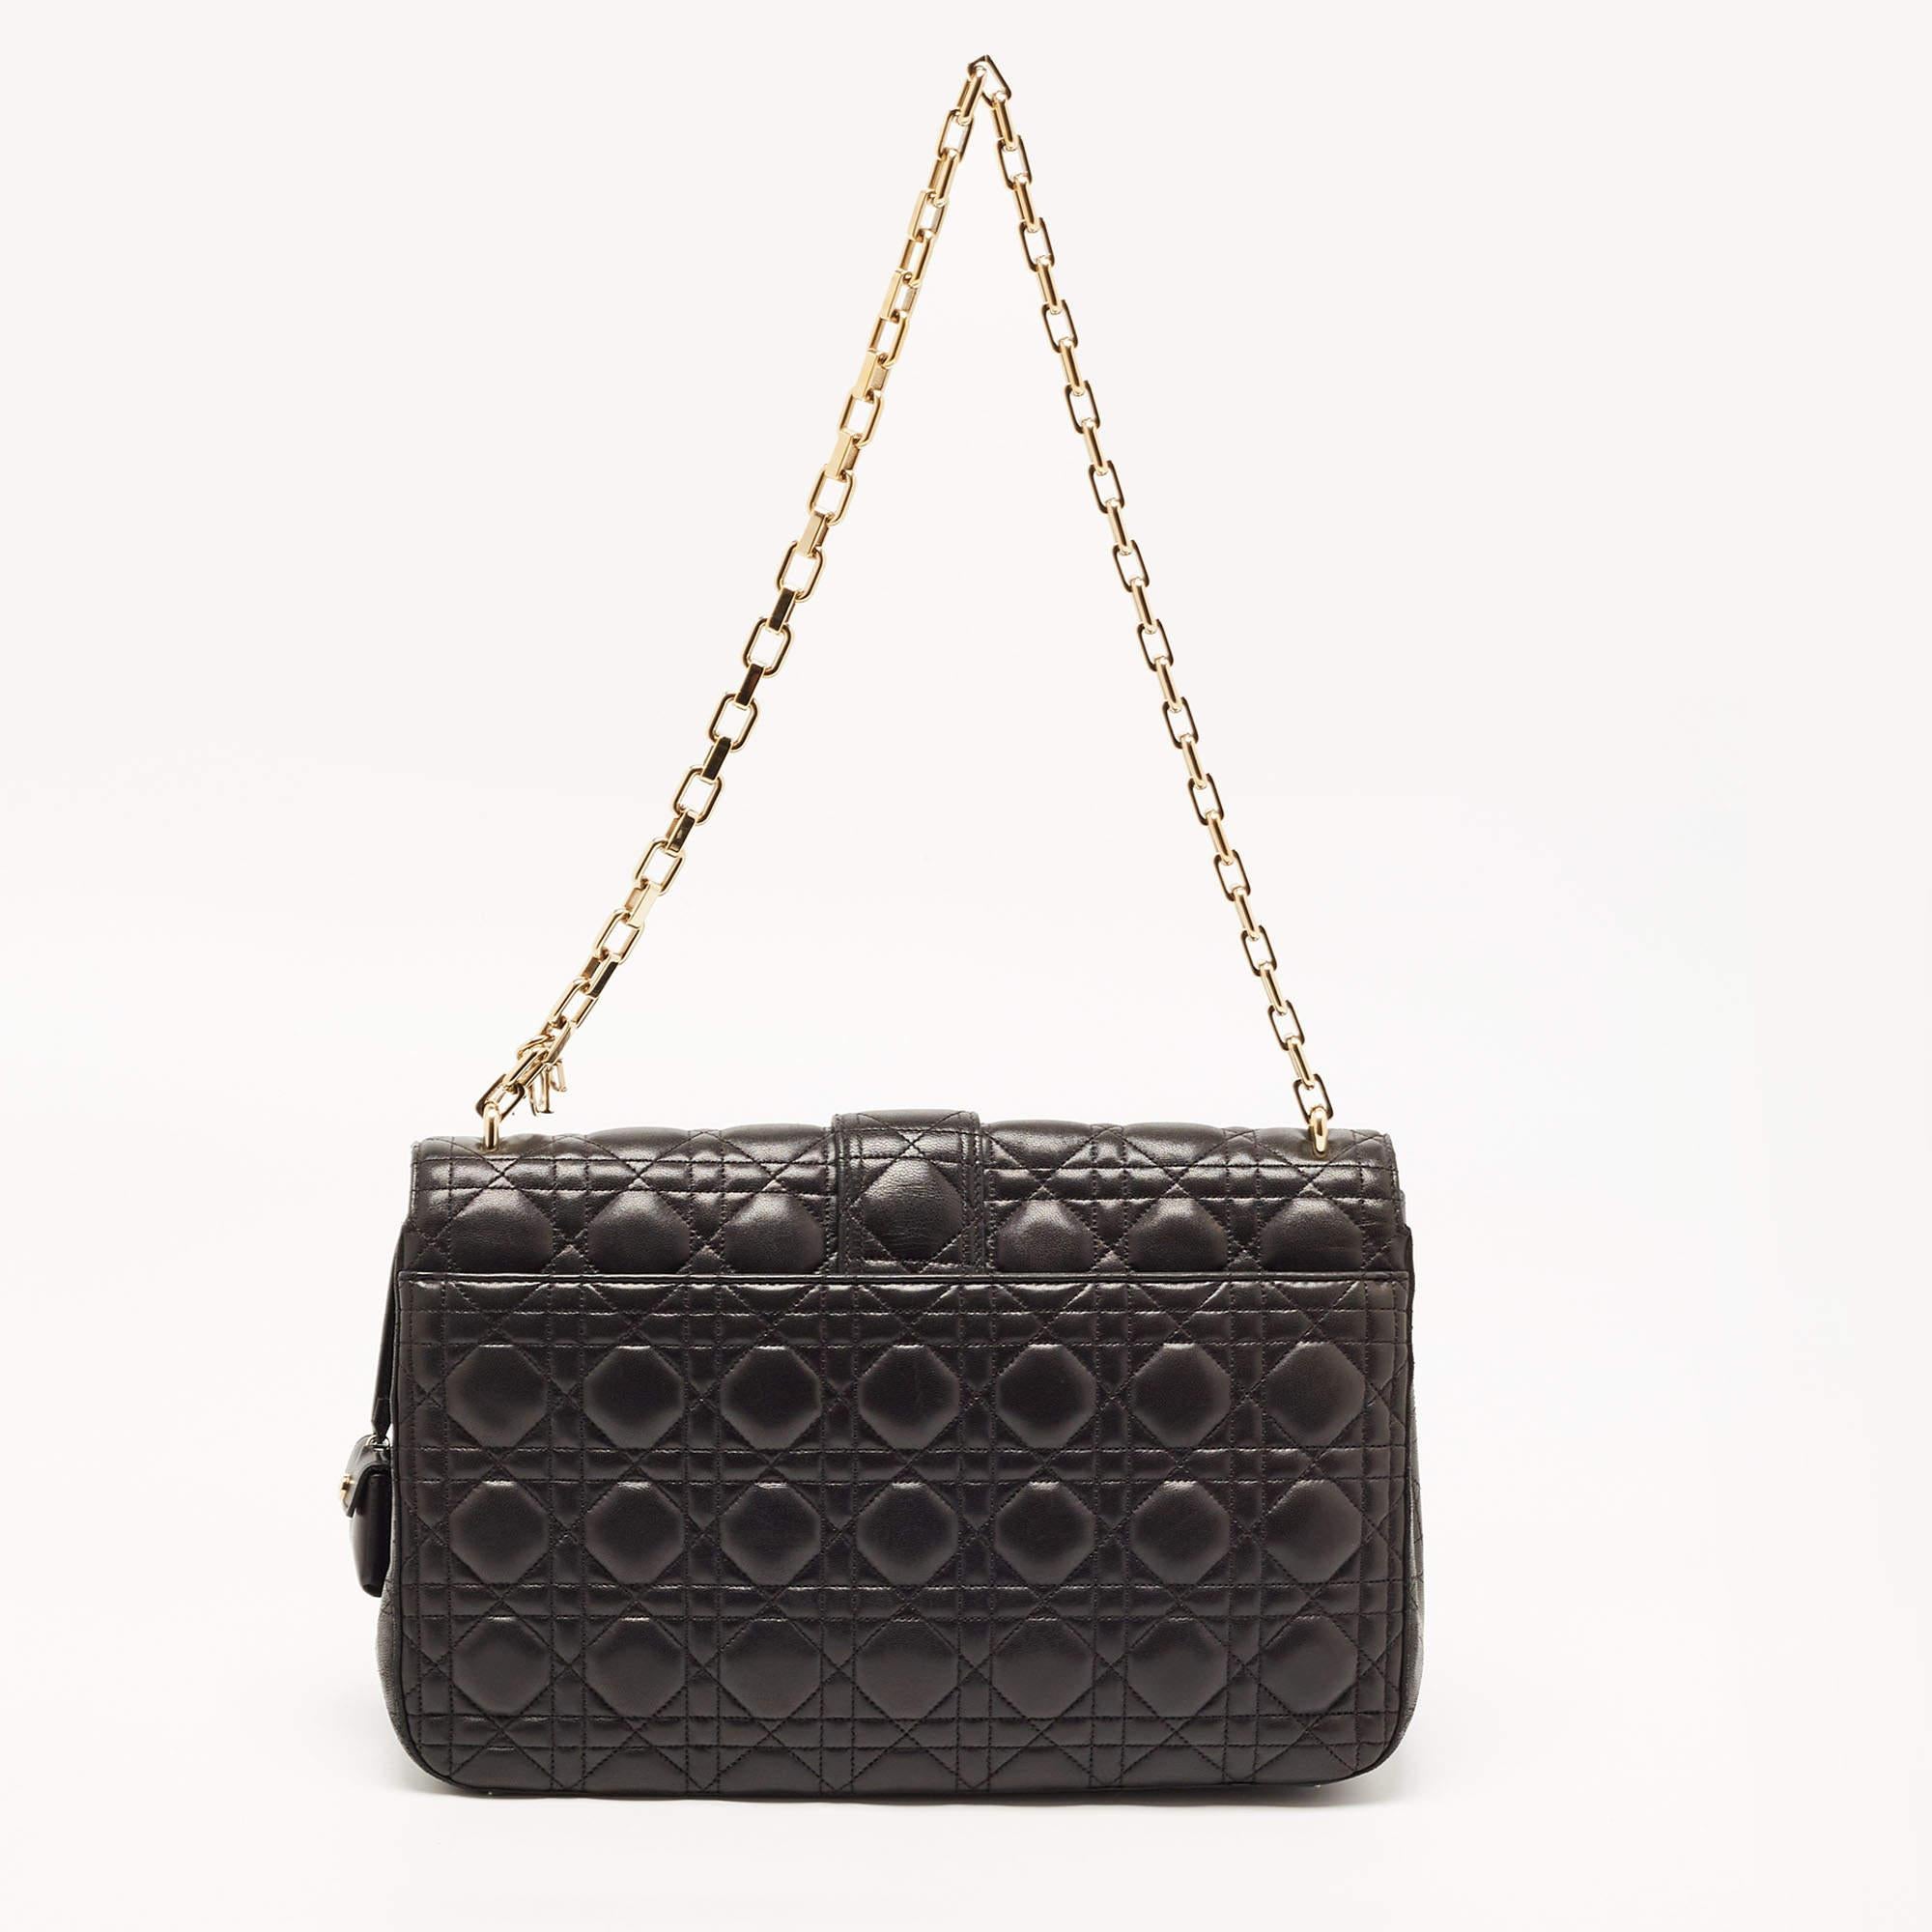 Bags like this Miss Dior will never go out of style. Crafted from leather, this Dior flap bag features a black Cannage exterior and a chain strap. The front flap has a Dior lock that opens to a leather-lined interior with enough space to keep your